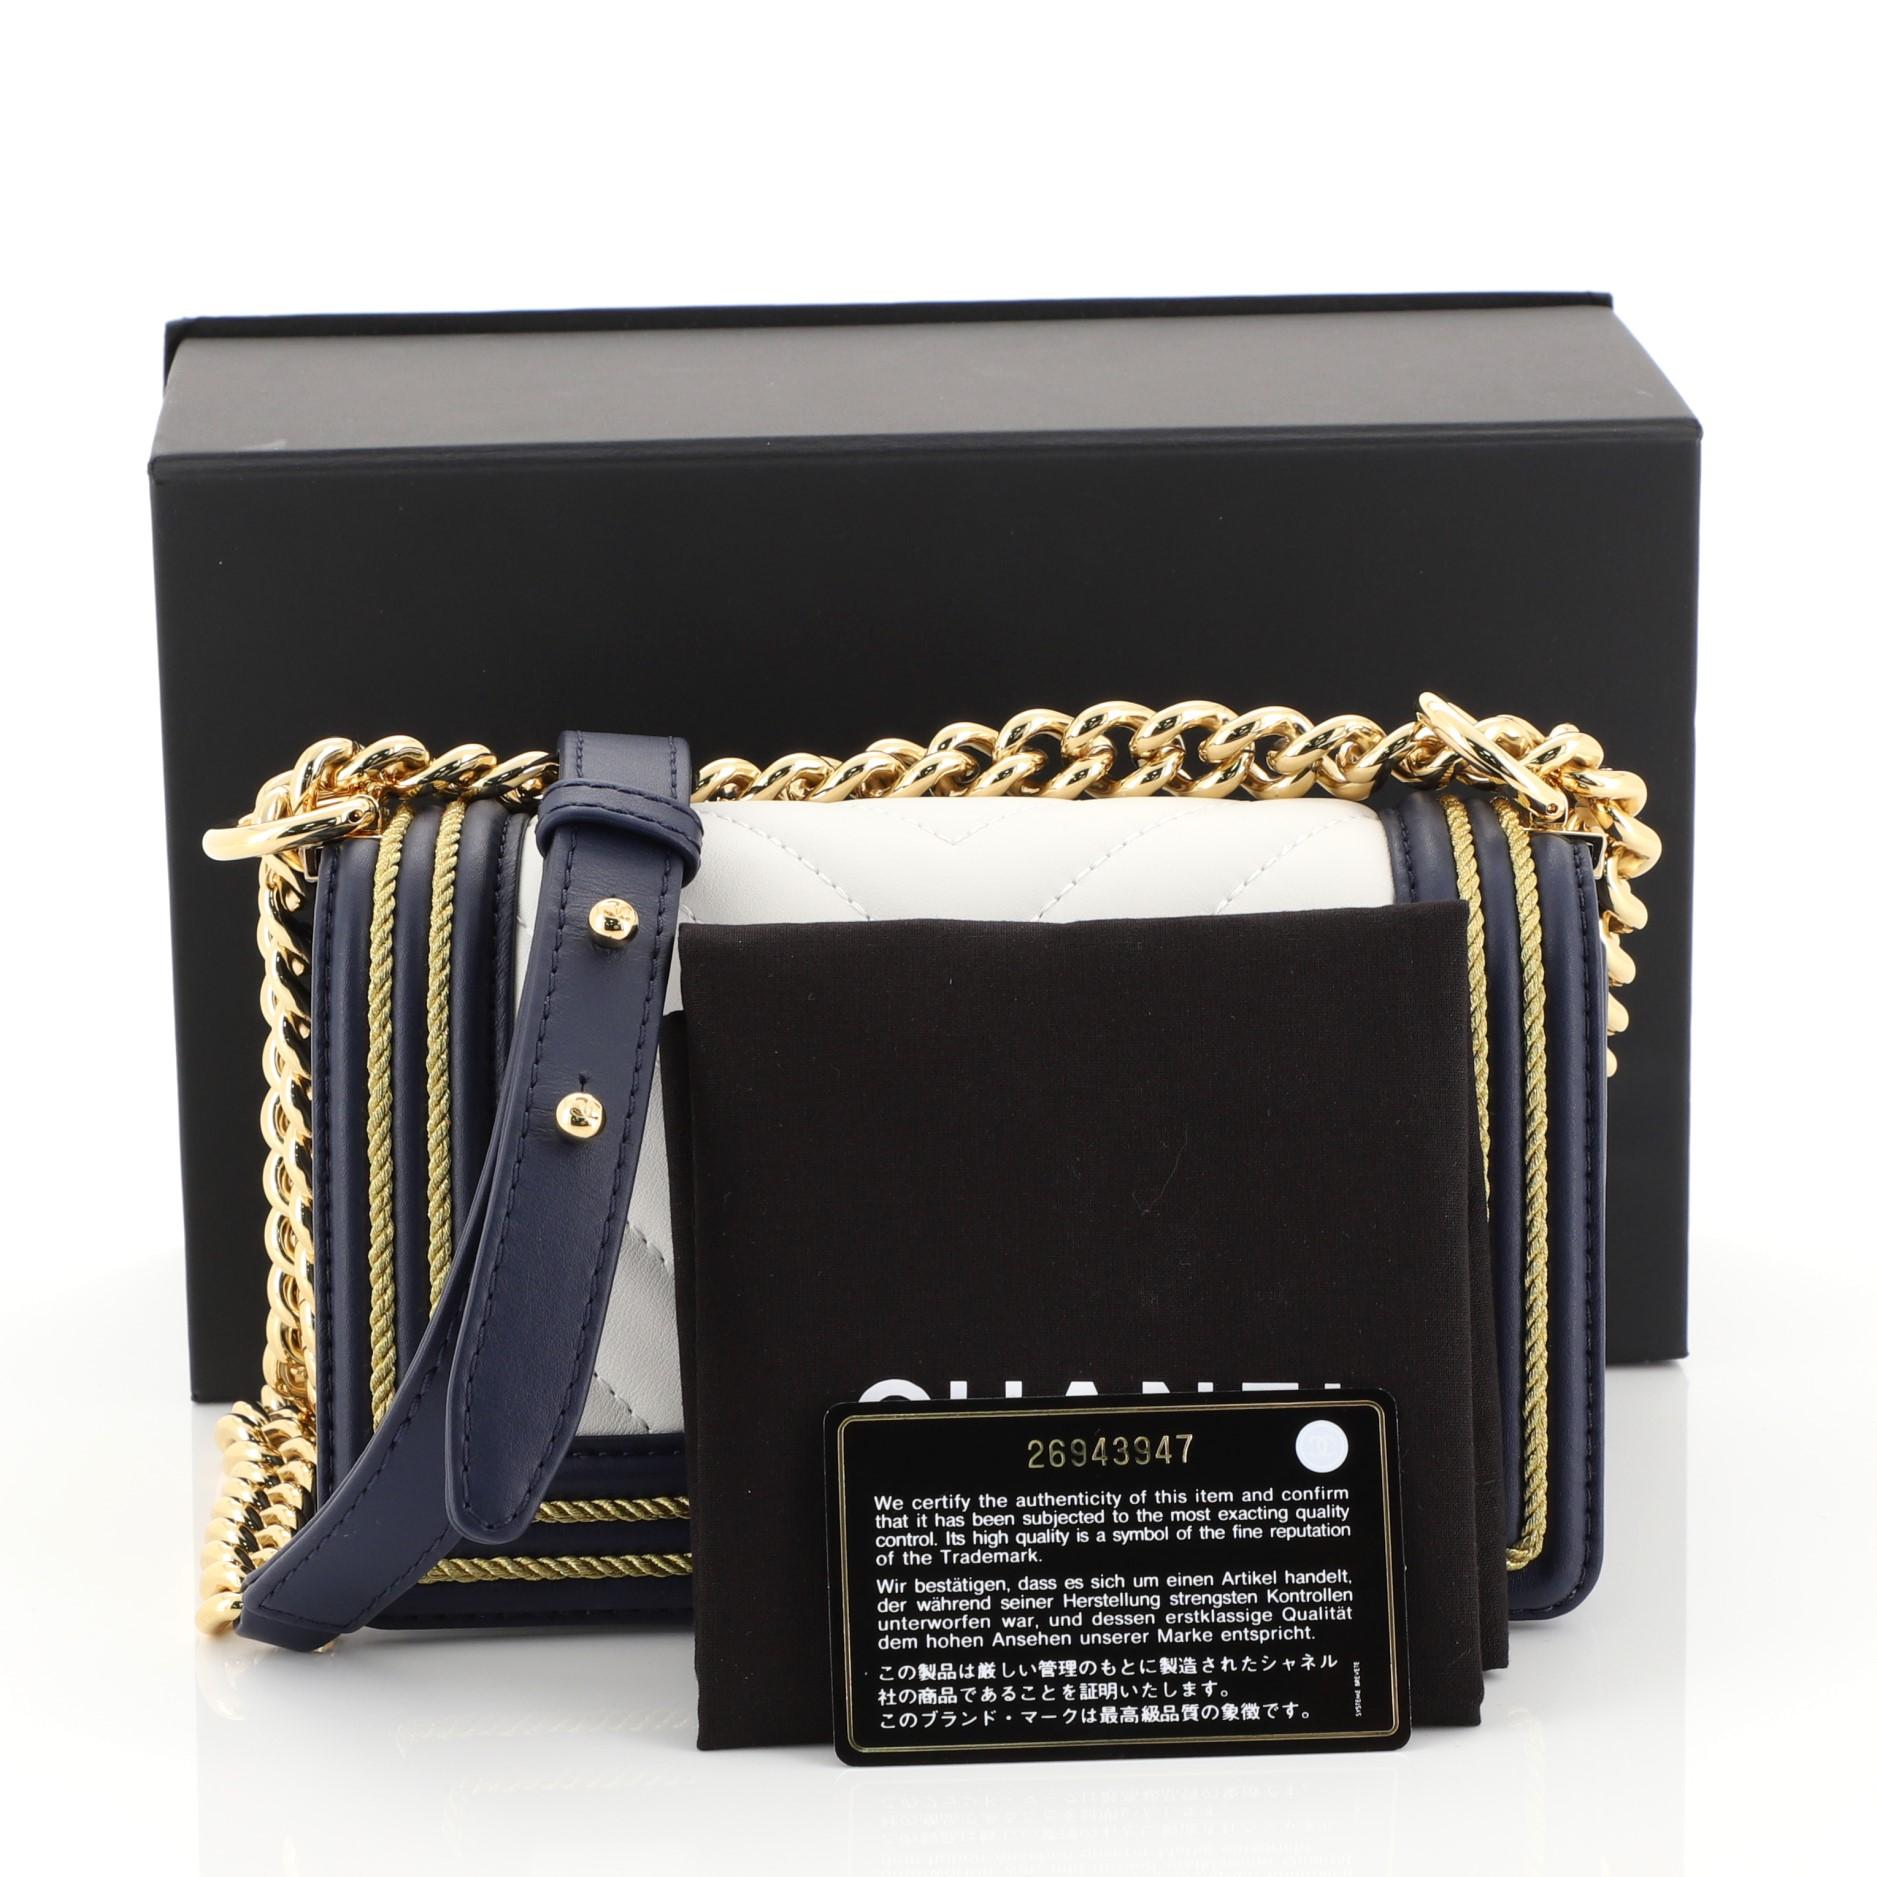 This Chanel Boy Flap Bag Chevron Calfskin with Braided Detail Small, crafted from white and blue chevron calfskin leather, features chain strap with leather shoulder pad, braided detail and gold-tone hardware. Its CC push-lock closure opens to a